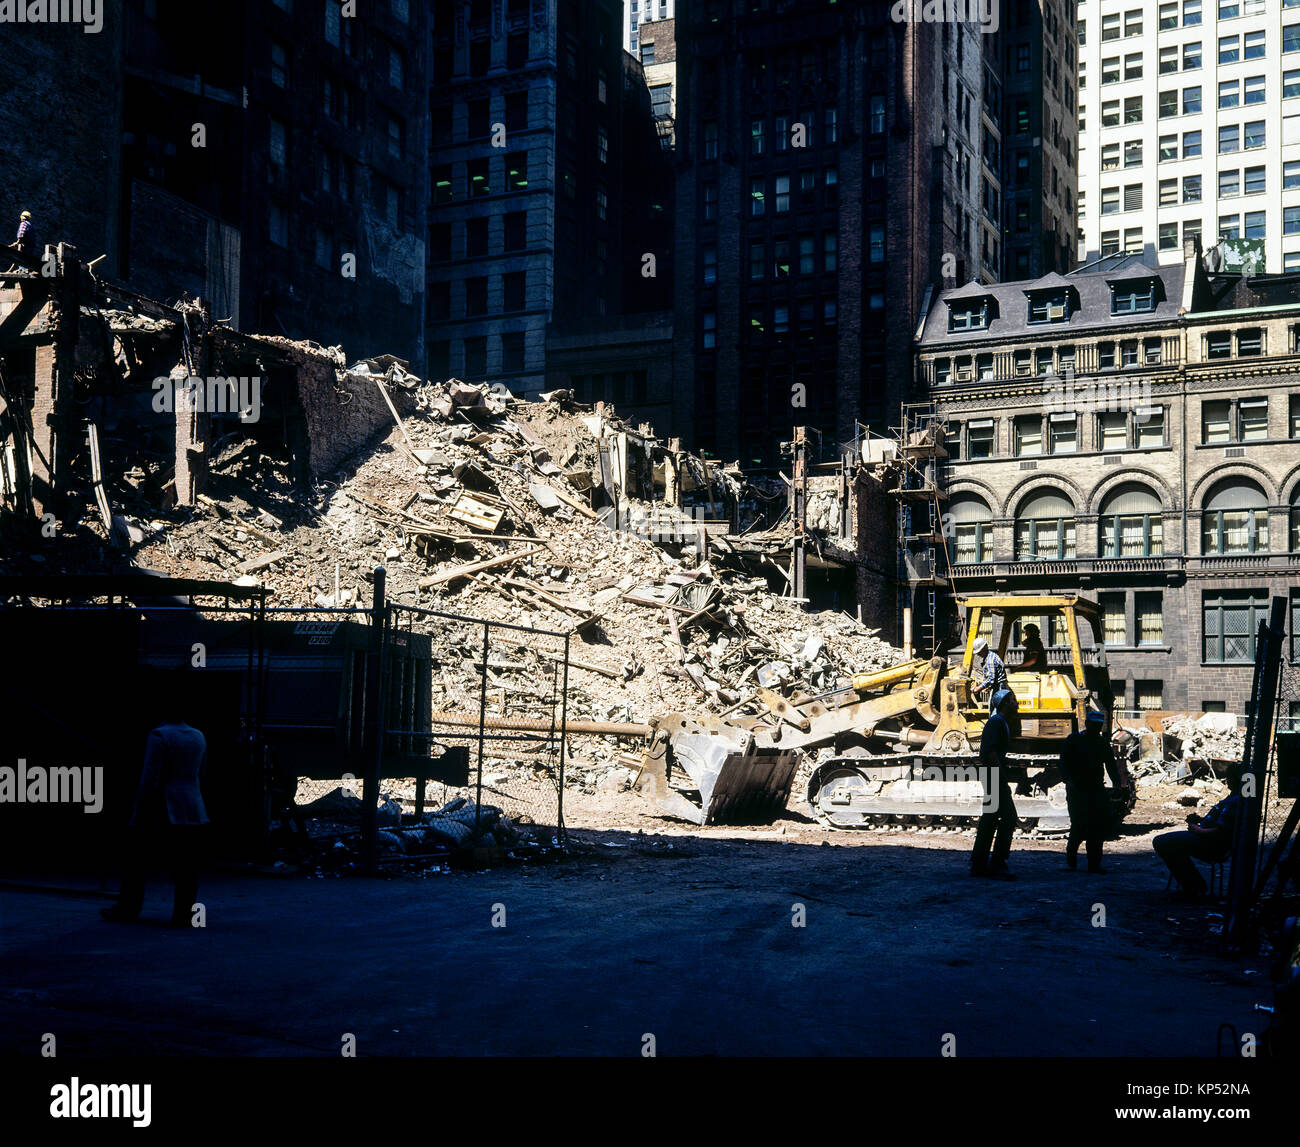 May 1982,New York,demolition site,bulldozer,construction workers,Wall street,financial district,New york City,NY,NYC,USA, Stock Photo